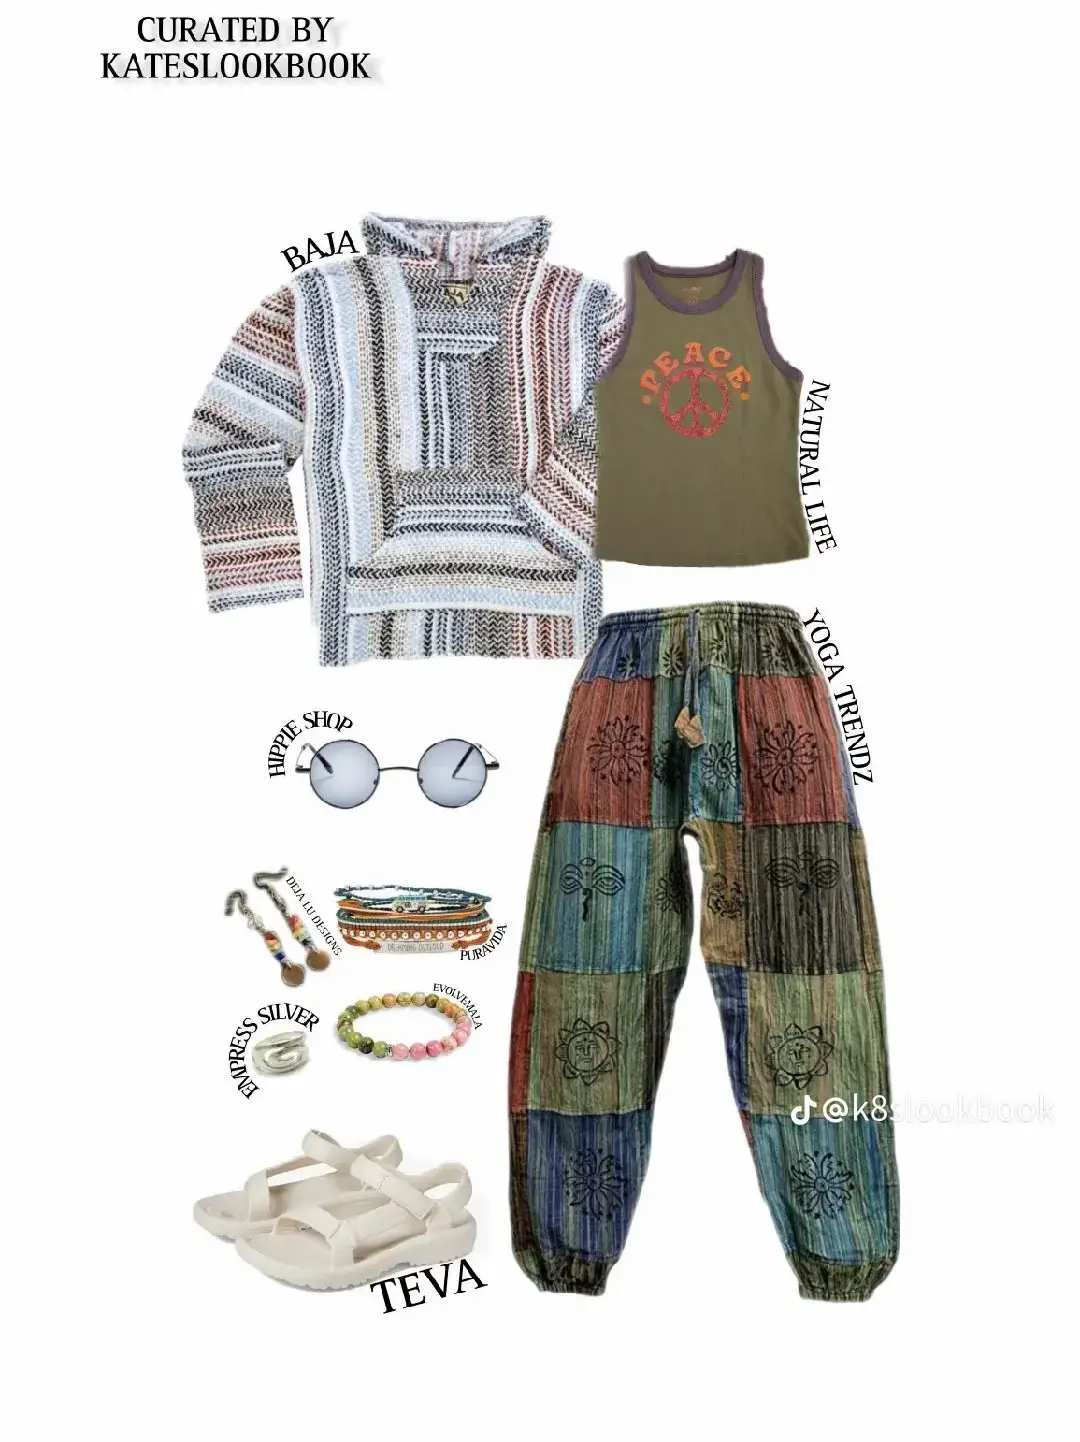 Hippie outfit  Hippie style clothing, Hippie outfits, Earthy outfits